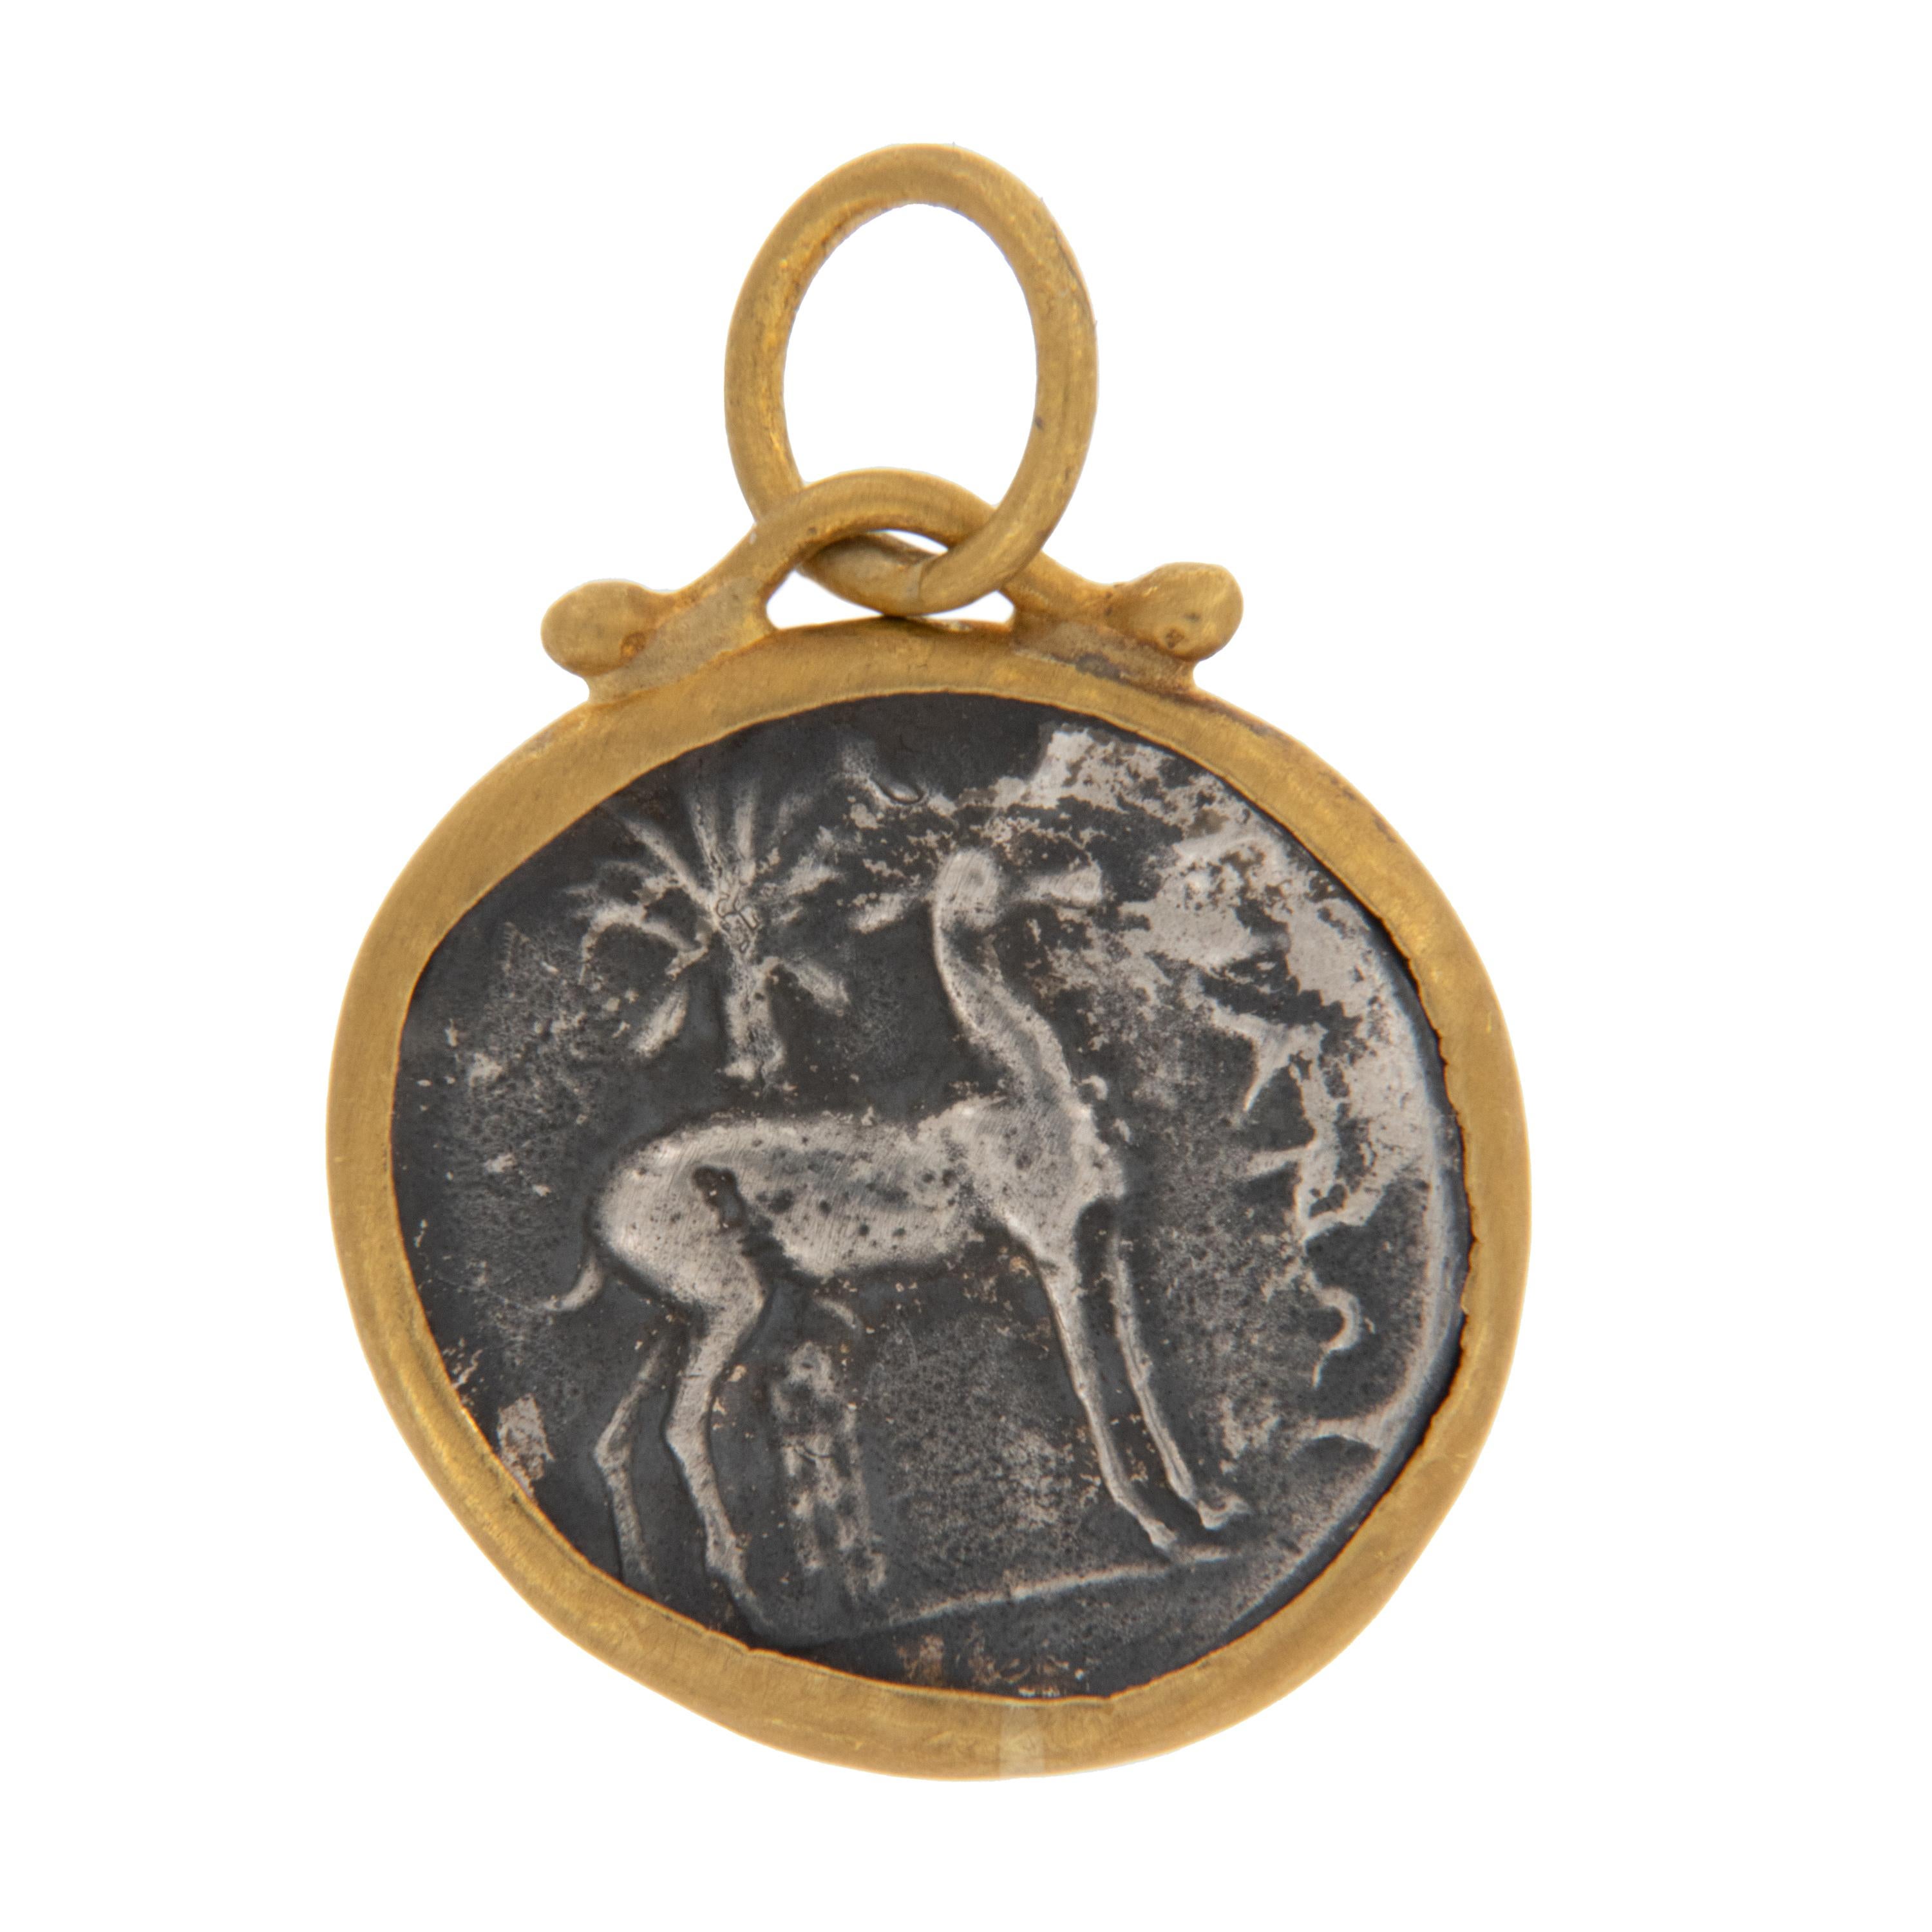 Rarest of all the golds, 24 karat gold is valued by all discerning investors. With it's unmistakable warm yellow color & hammered finish this ancient round replica Ephesus coin with queen bee and stag accented with diamond is truly museum quality.